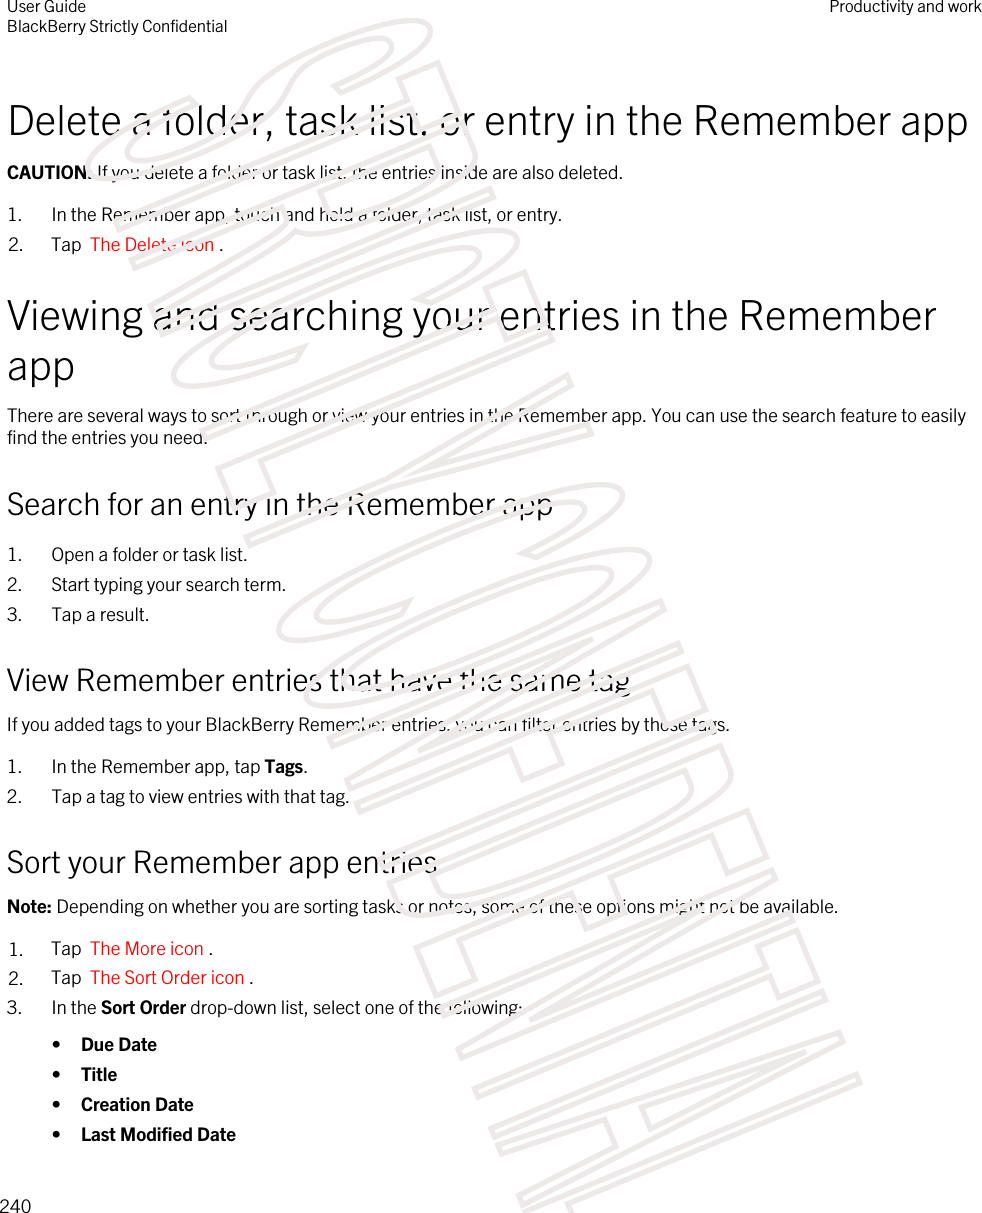 Delete a folder, task list, or entry in the Remember appCAUTION: If you delete a folder or task list, the entries inside are also deleted.1. In the Remember app, touch and hold a folder, task list, or entry.2. Tap  The Delete icon .Viewing and searching your entries in the Remember appThere are several ways to sort through or view your entries in the Remember app. You can use the search feature to easily find the entries you need.Search for an entry in the Remember app1. Open a folder or task list.2. Start typing your search term.3. Tap a result.View Remember entries that have the same tagIf you added tags to your BlackBerry Remember entries, you can filter entries by those tags.1. In the Remember app, tap Tags.2. Tap a tag to view entries with that tag.Sort your Remember app entriesNote: Depending on whether you are sorting tasks or notes, some of these options might not be available.1. Tap  The More icon . 2. Tap  The Sort Order icon .3. In the Sort Order drop-down list, select one of the following:•Due Date•Title•Creation Date•Last Modified DateUser GuideBlackBerry Strictly ConfidentialProductivity and work240STRICTLY CONFIDENTIAL